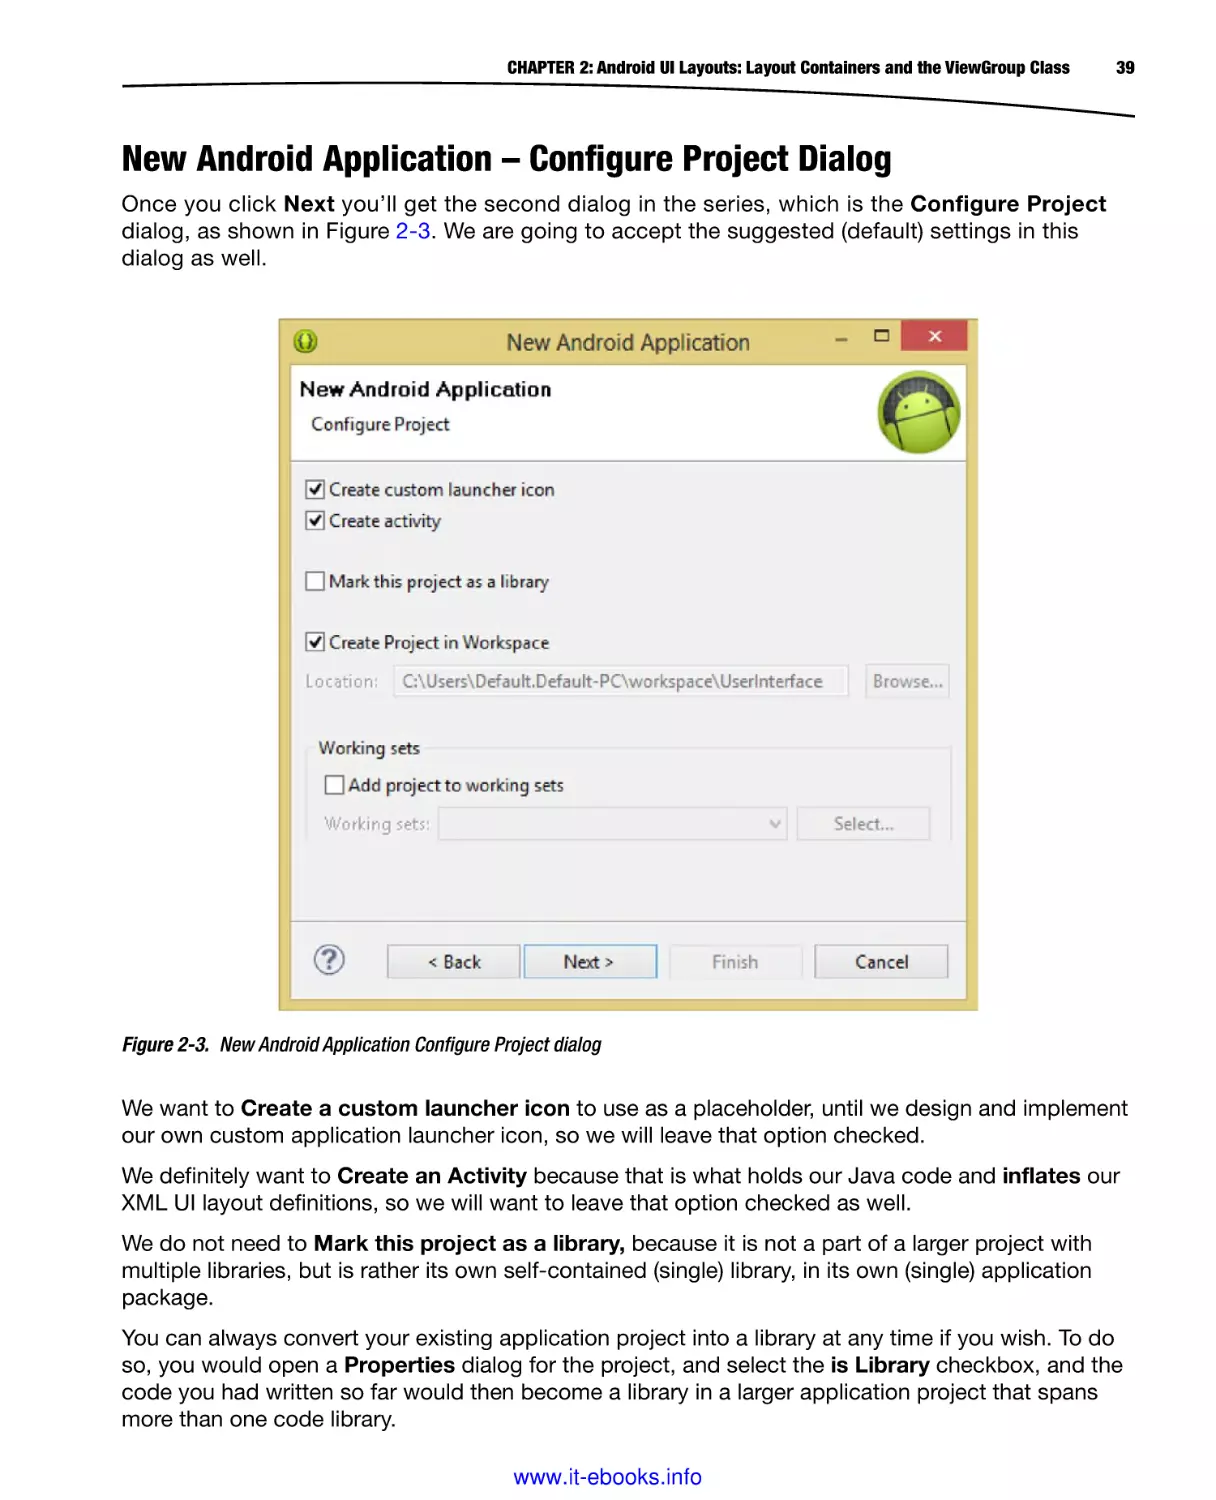 New Android Application – Configure Project Dialog